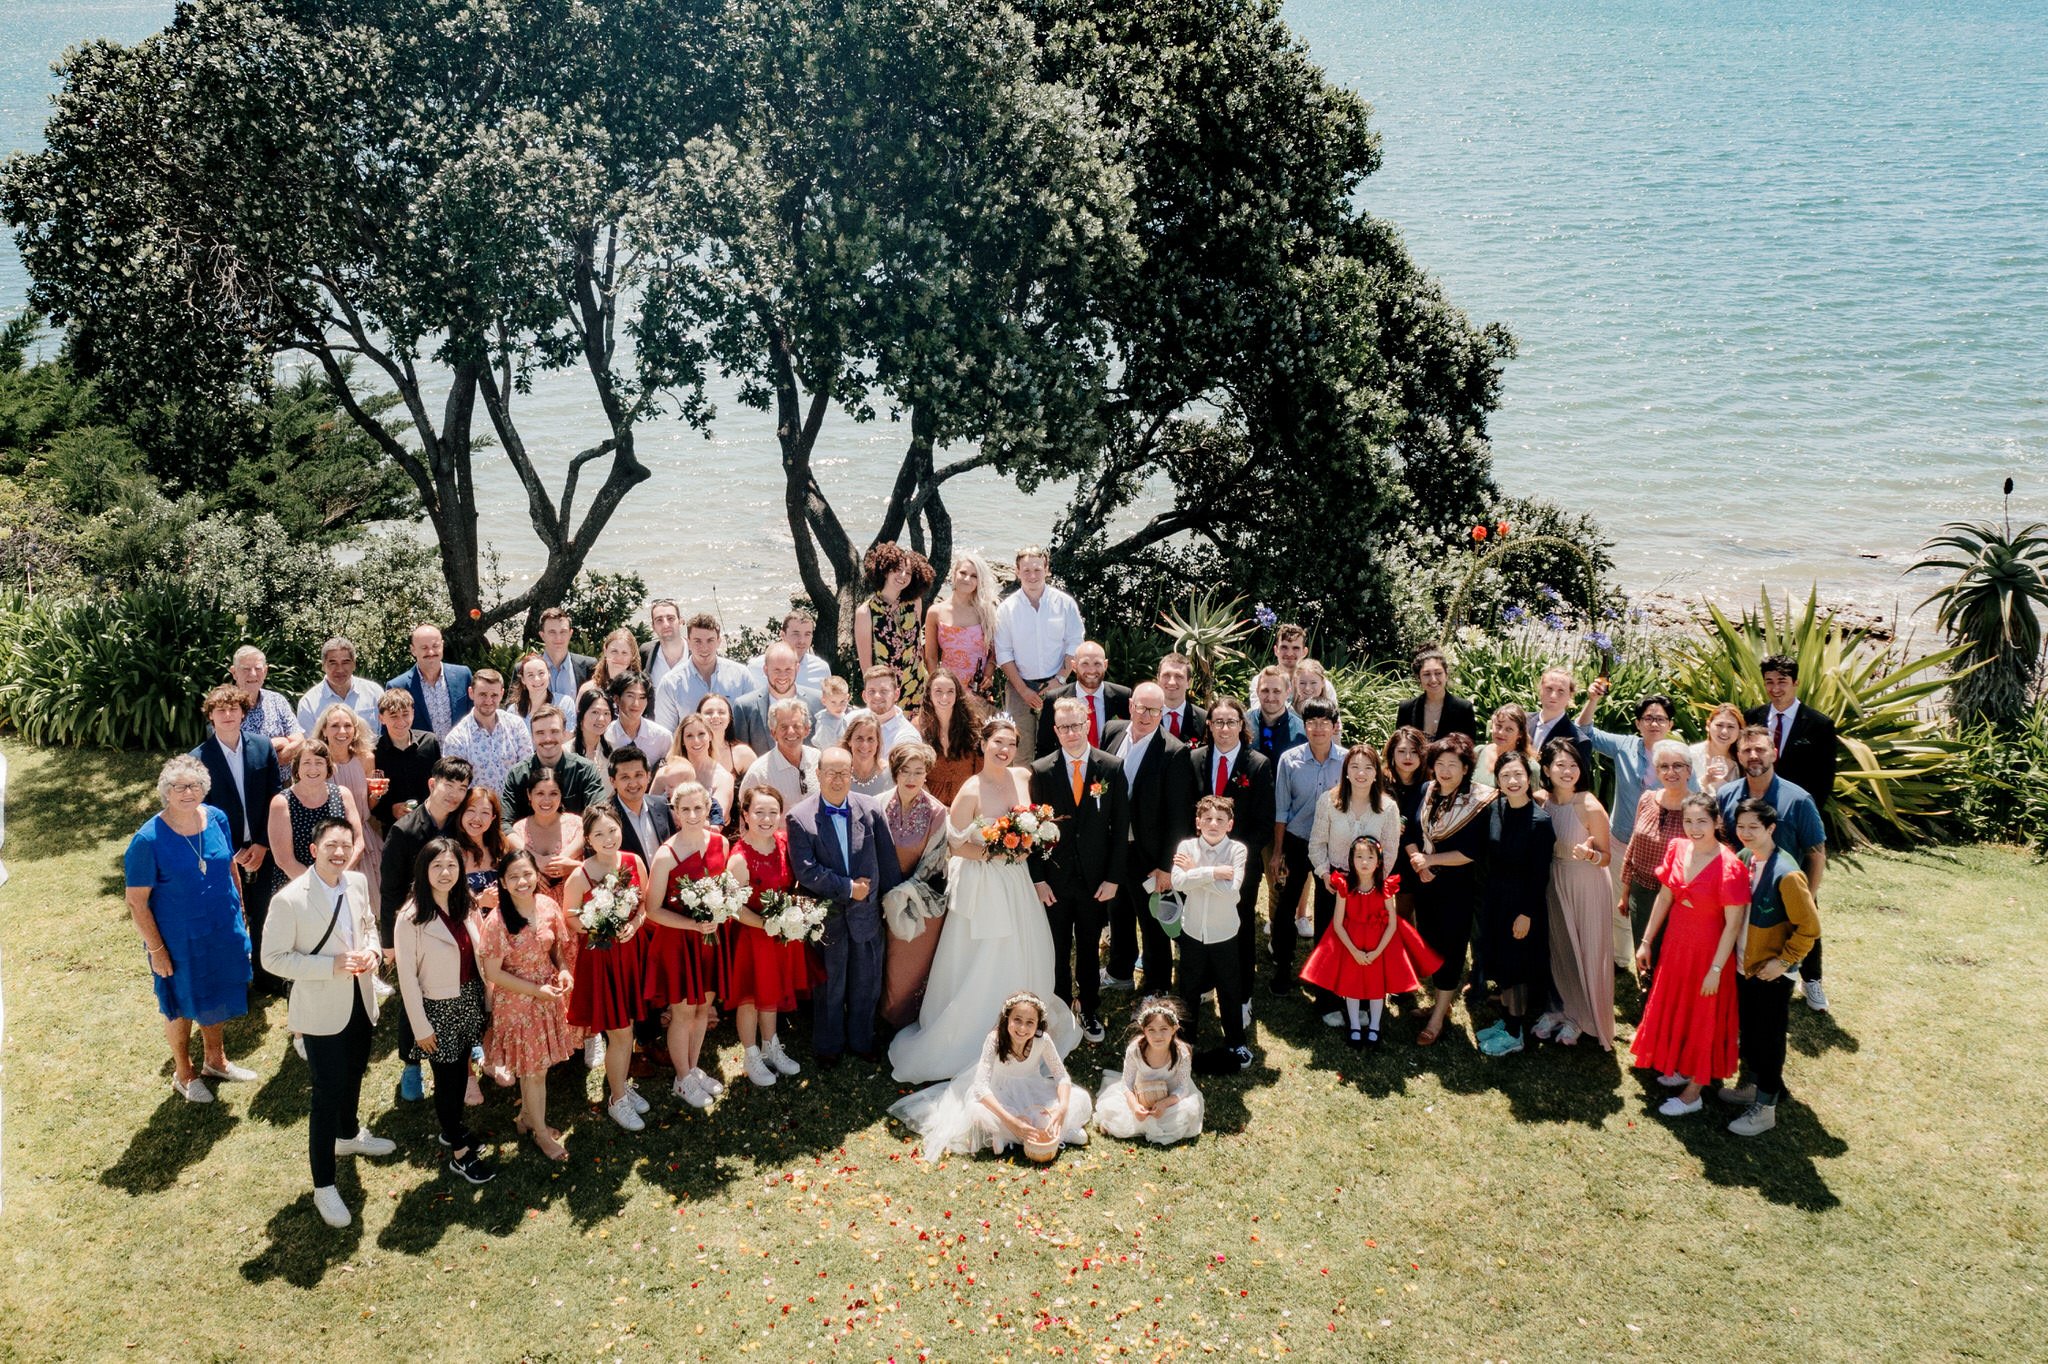 huntly-house-auckland-wedding-venue-mansion-vintage-luxury-accommodation-photographer-videography-dear-white-productions-photo-film-south-clarks-beach (73).jpg